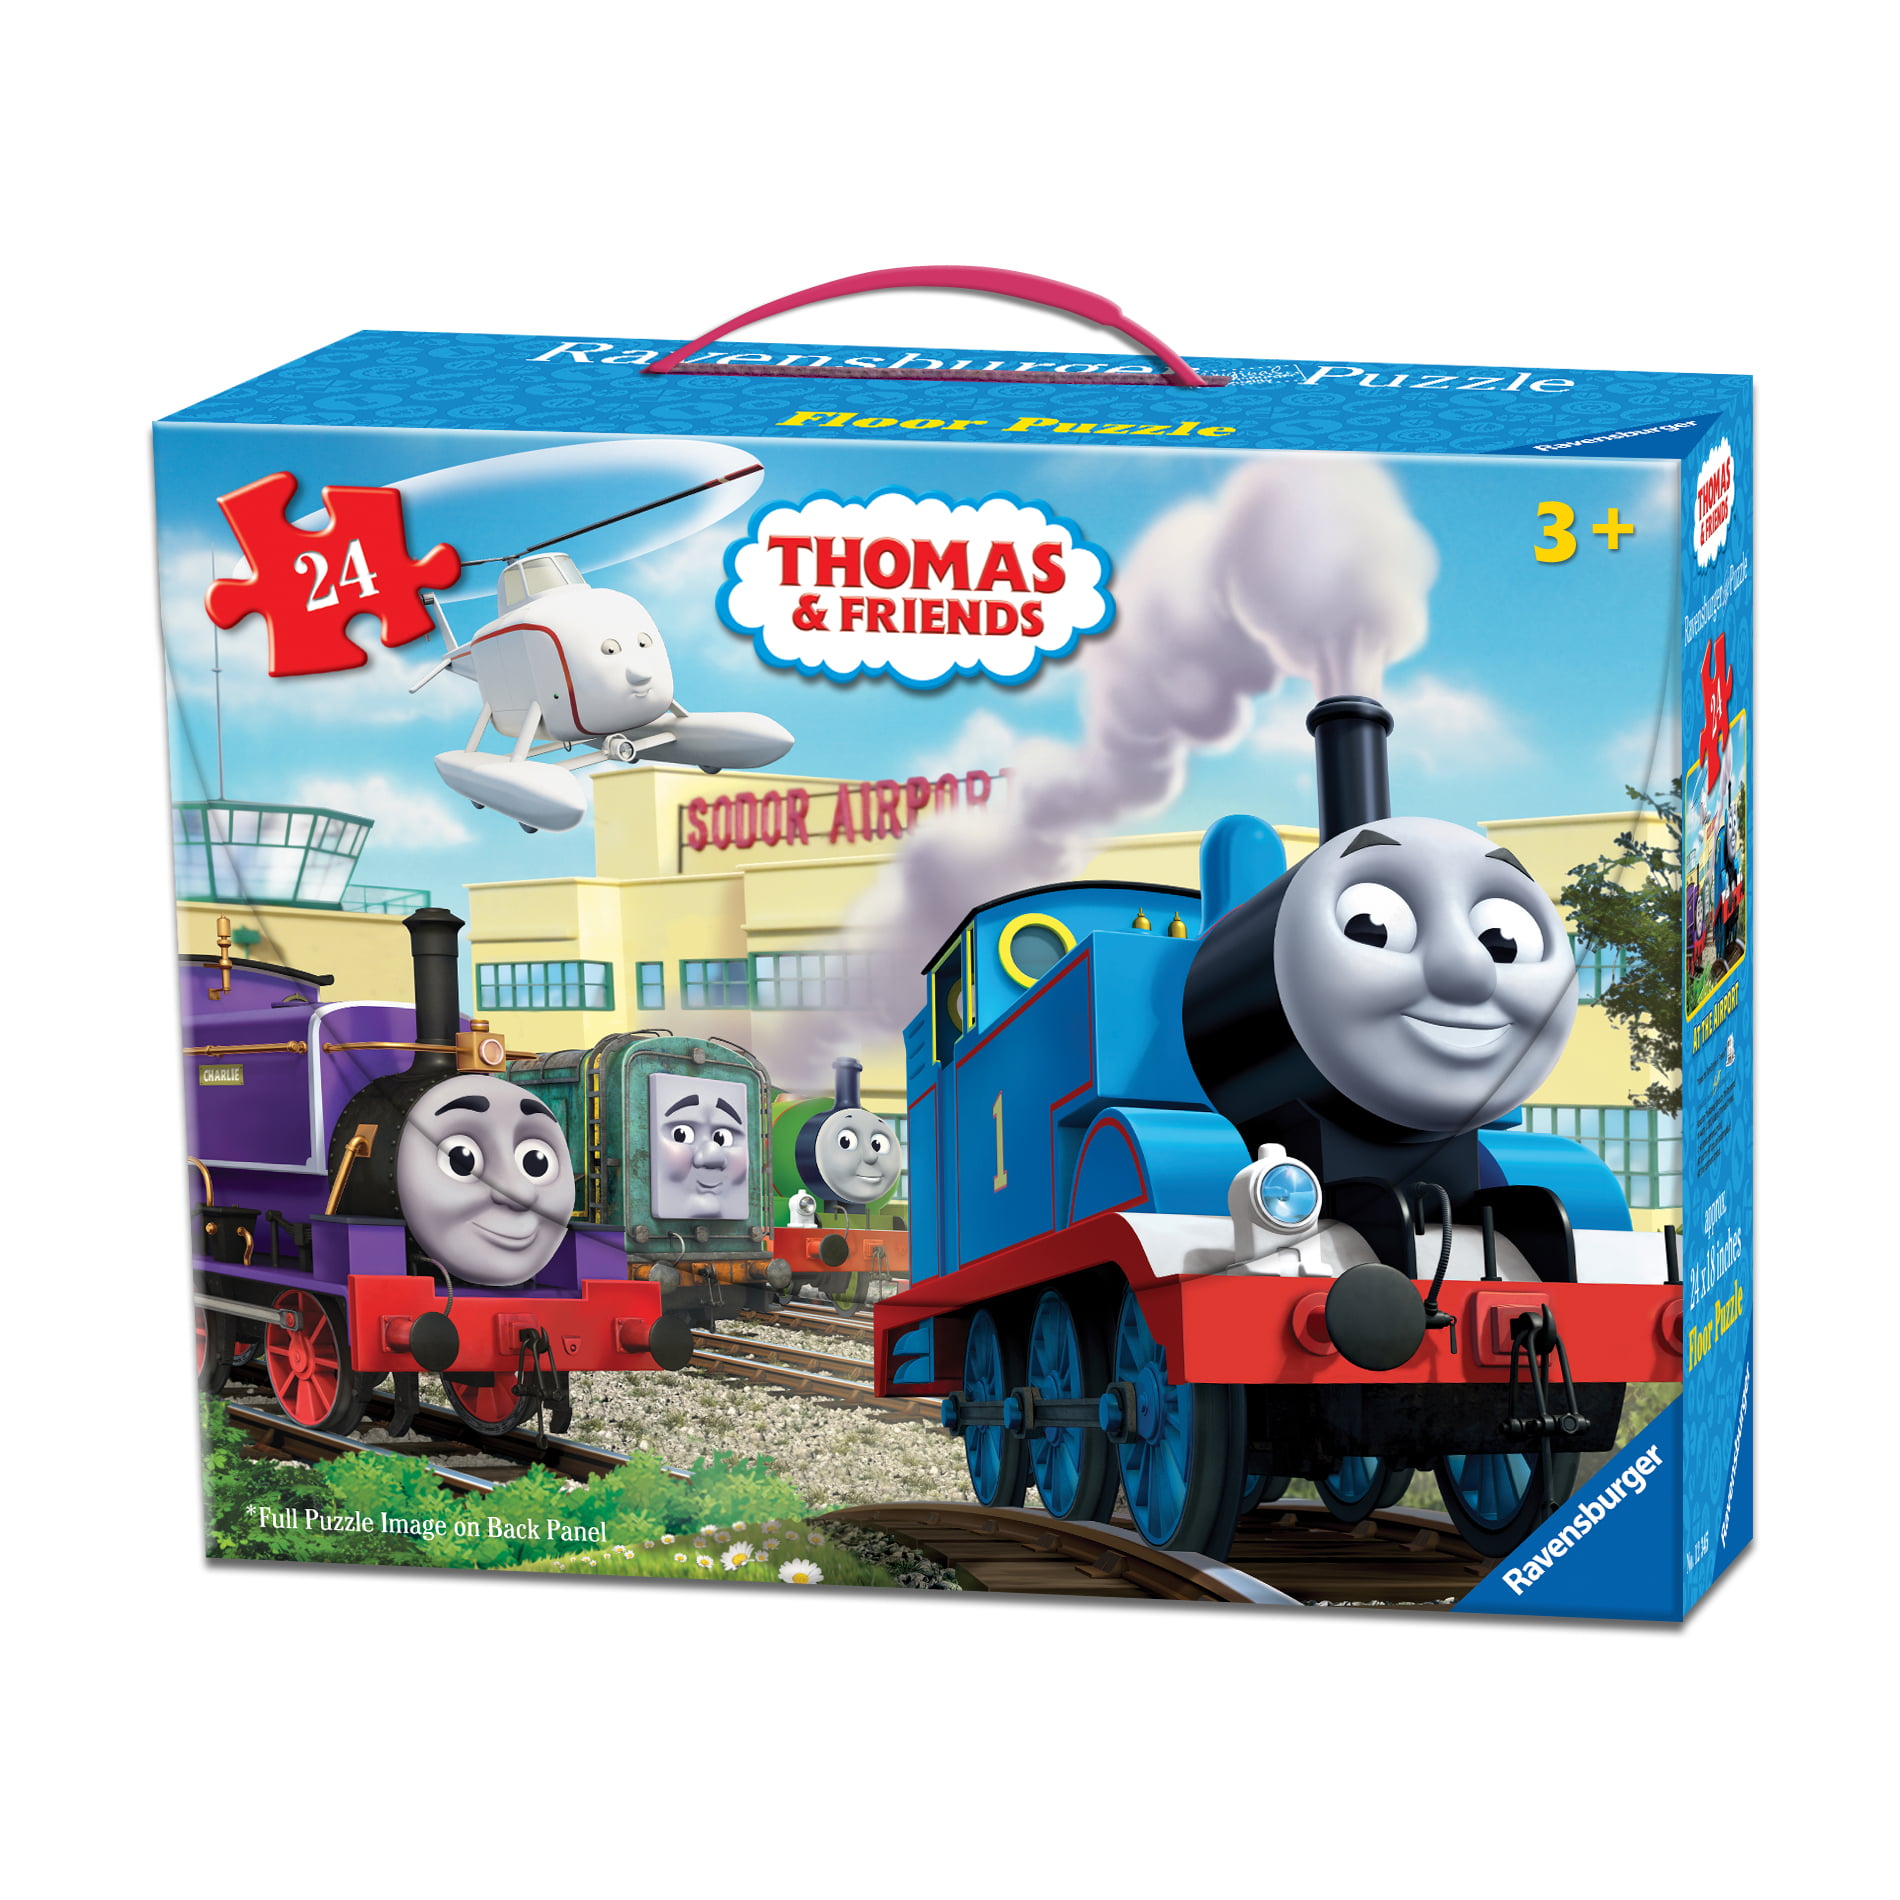 My First Puzzle Jigsaw Puzzle Ravensburger Thomas and Friends 